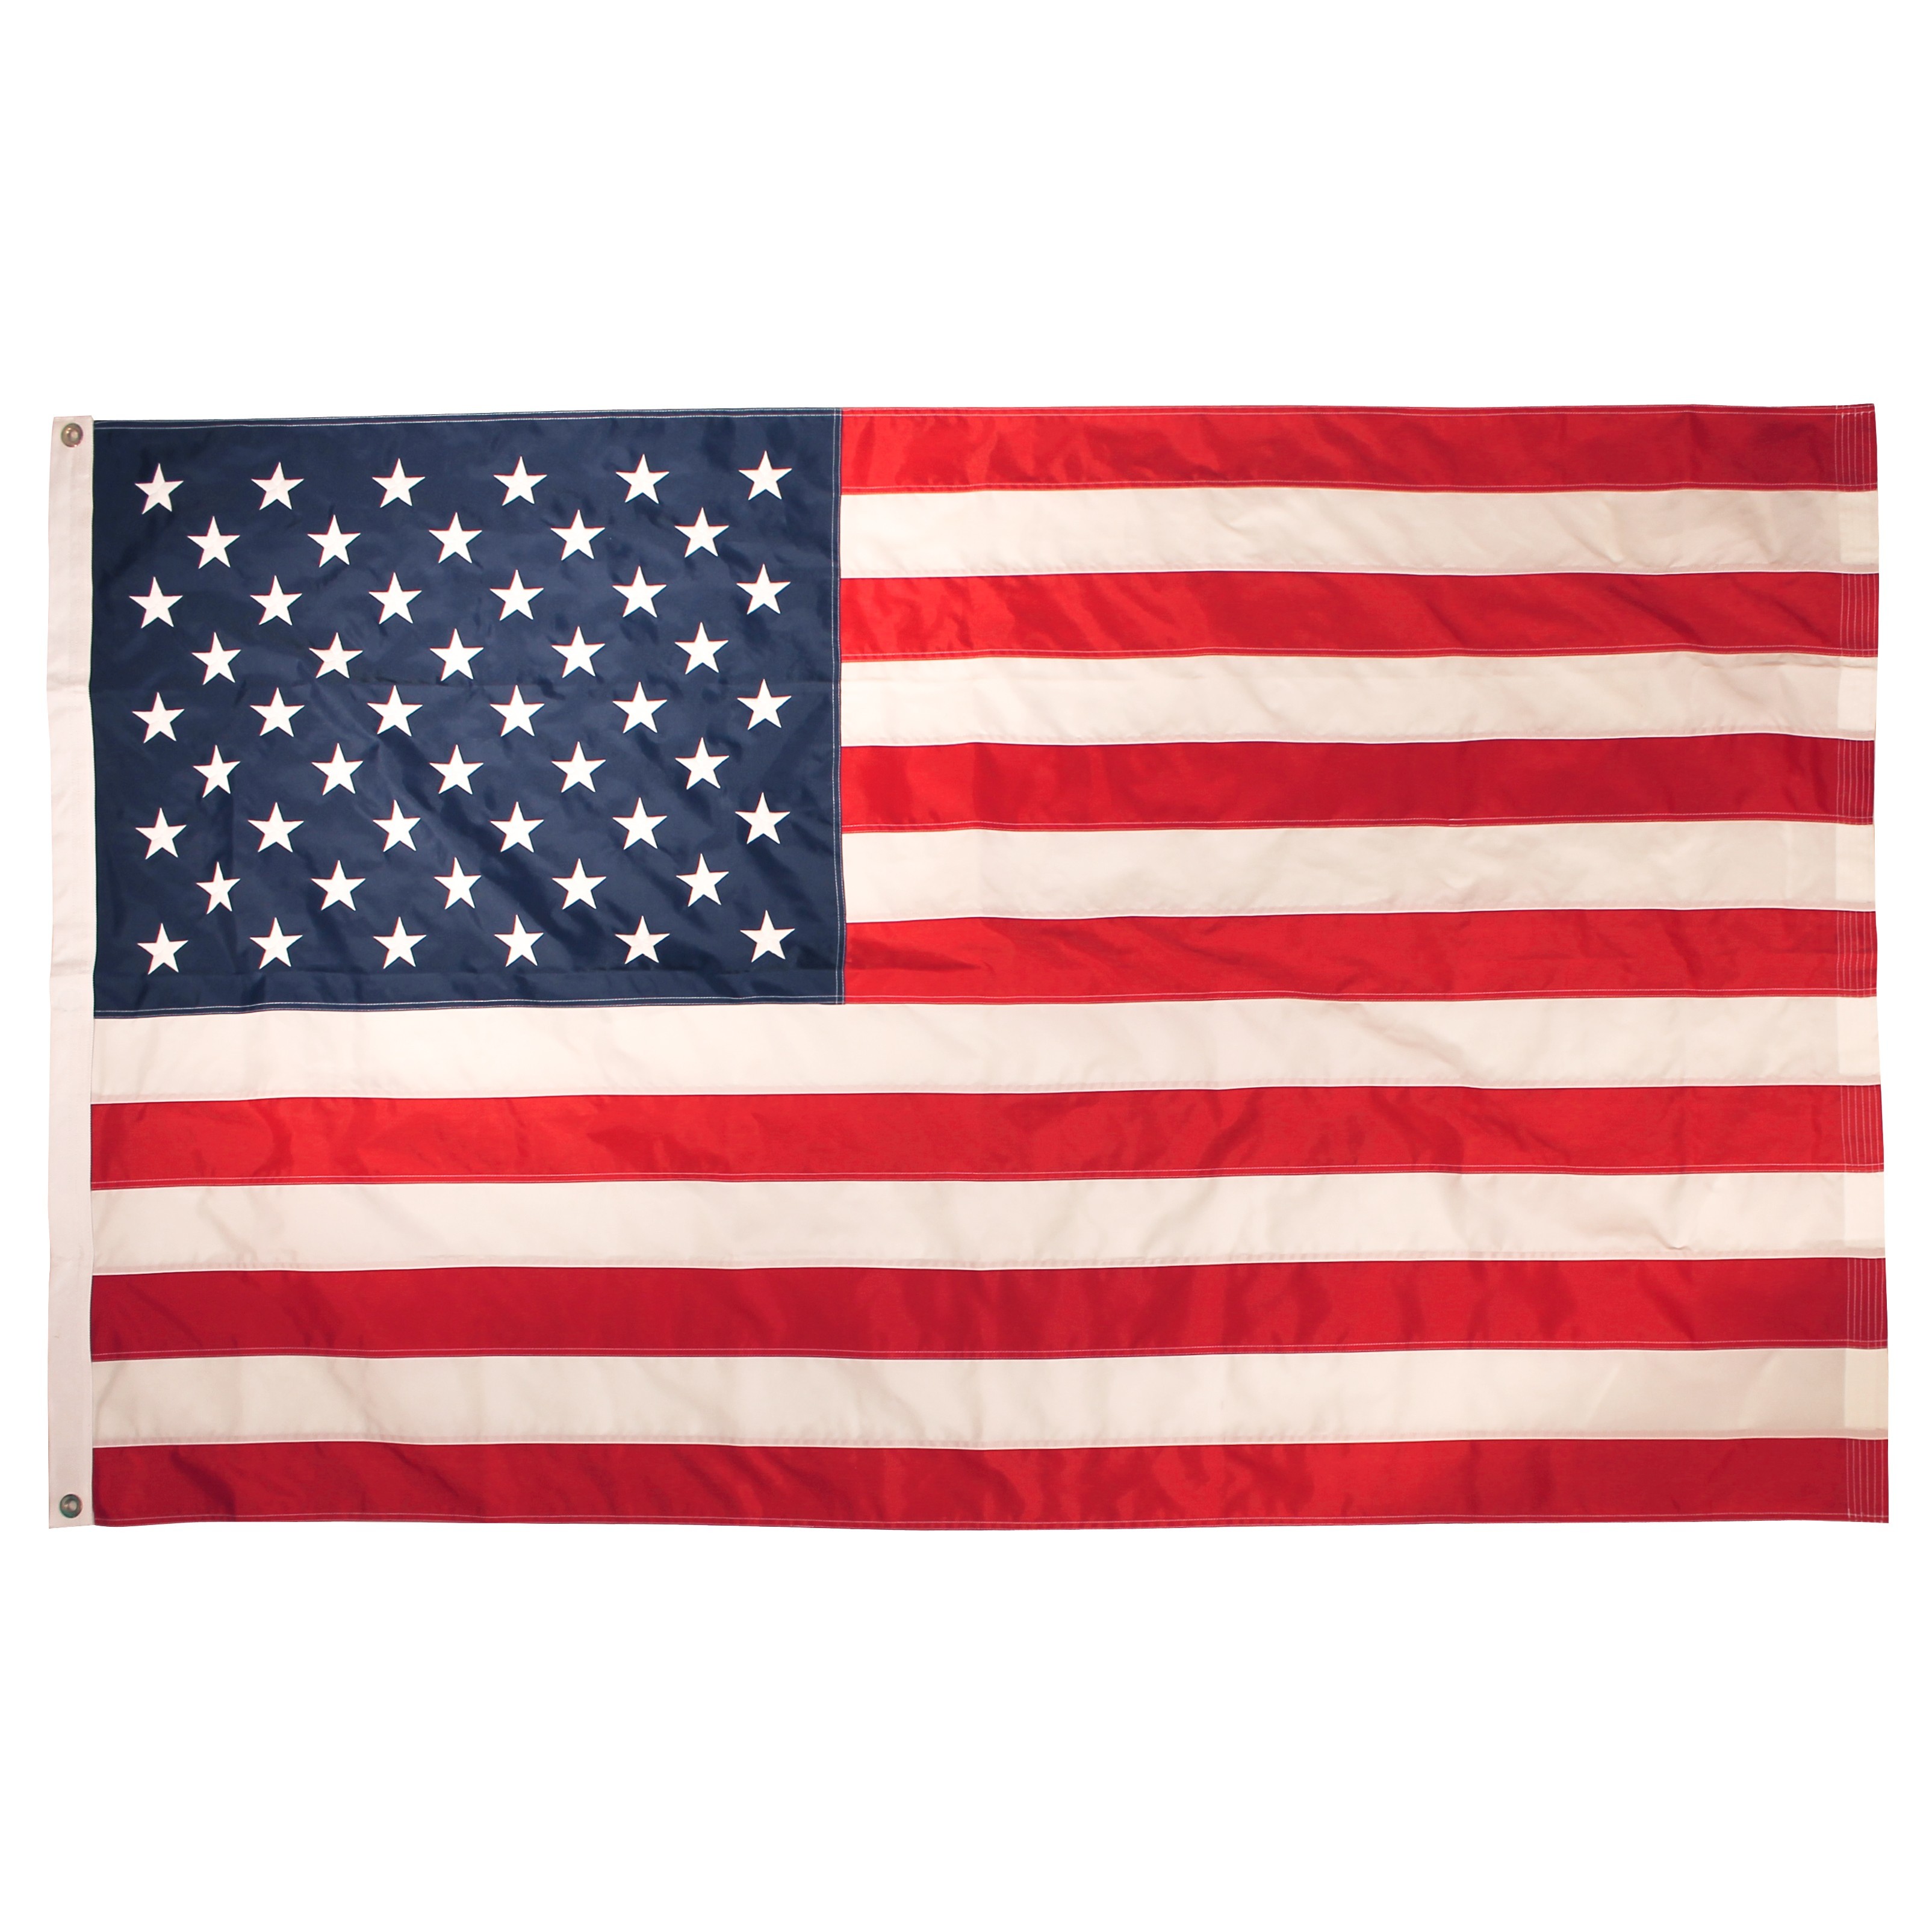 United States Building Pennants and Flags